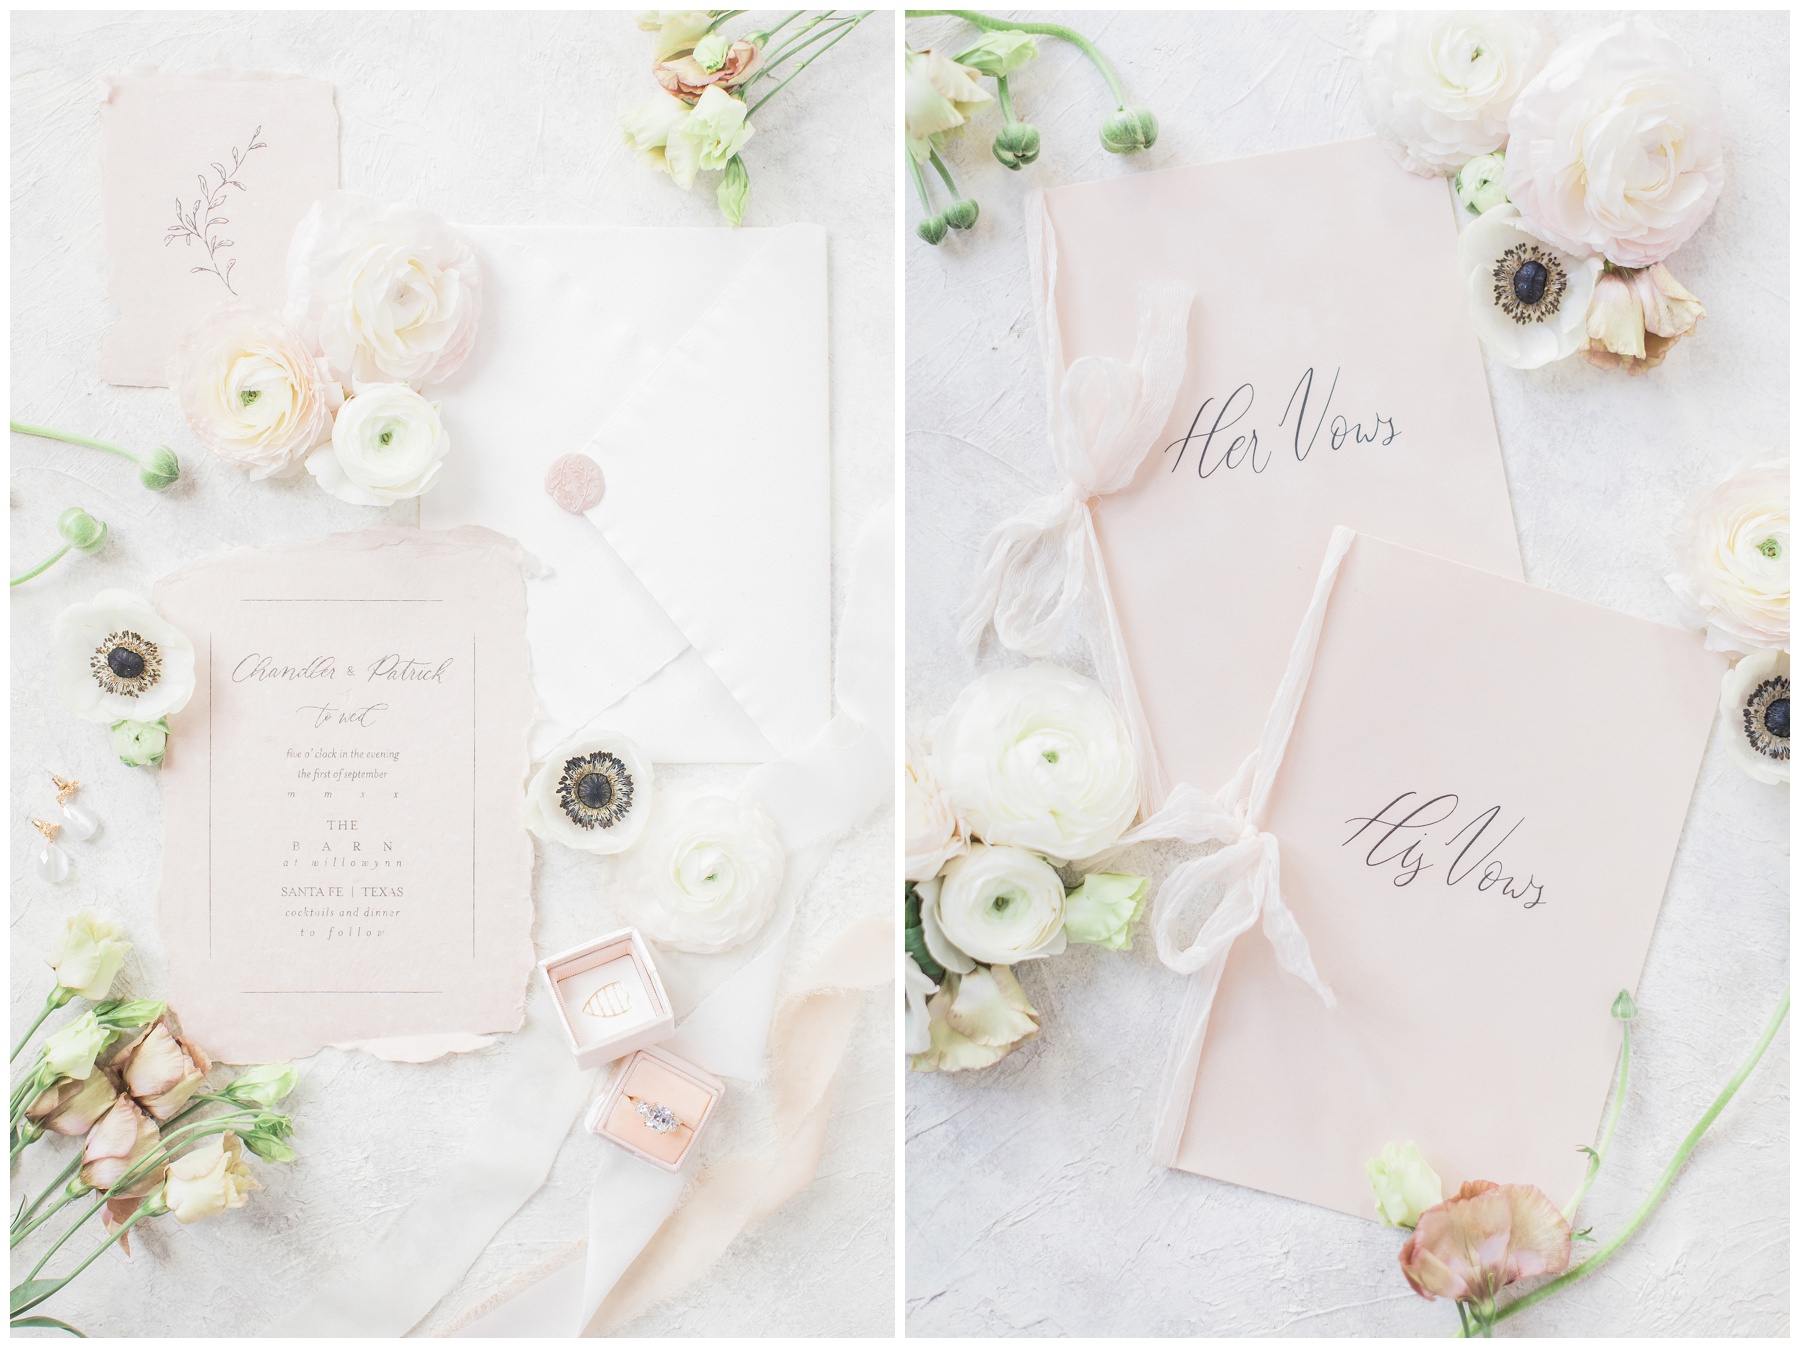 Wedding stationery do's and don'ts from a former wedding stationery designer